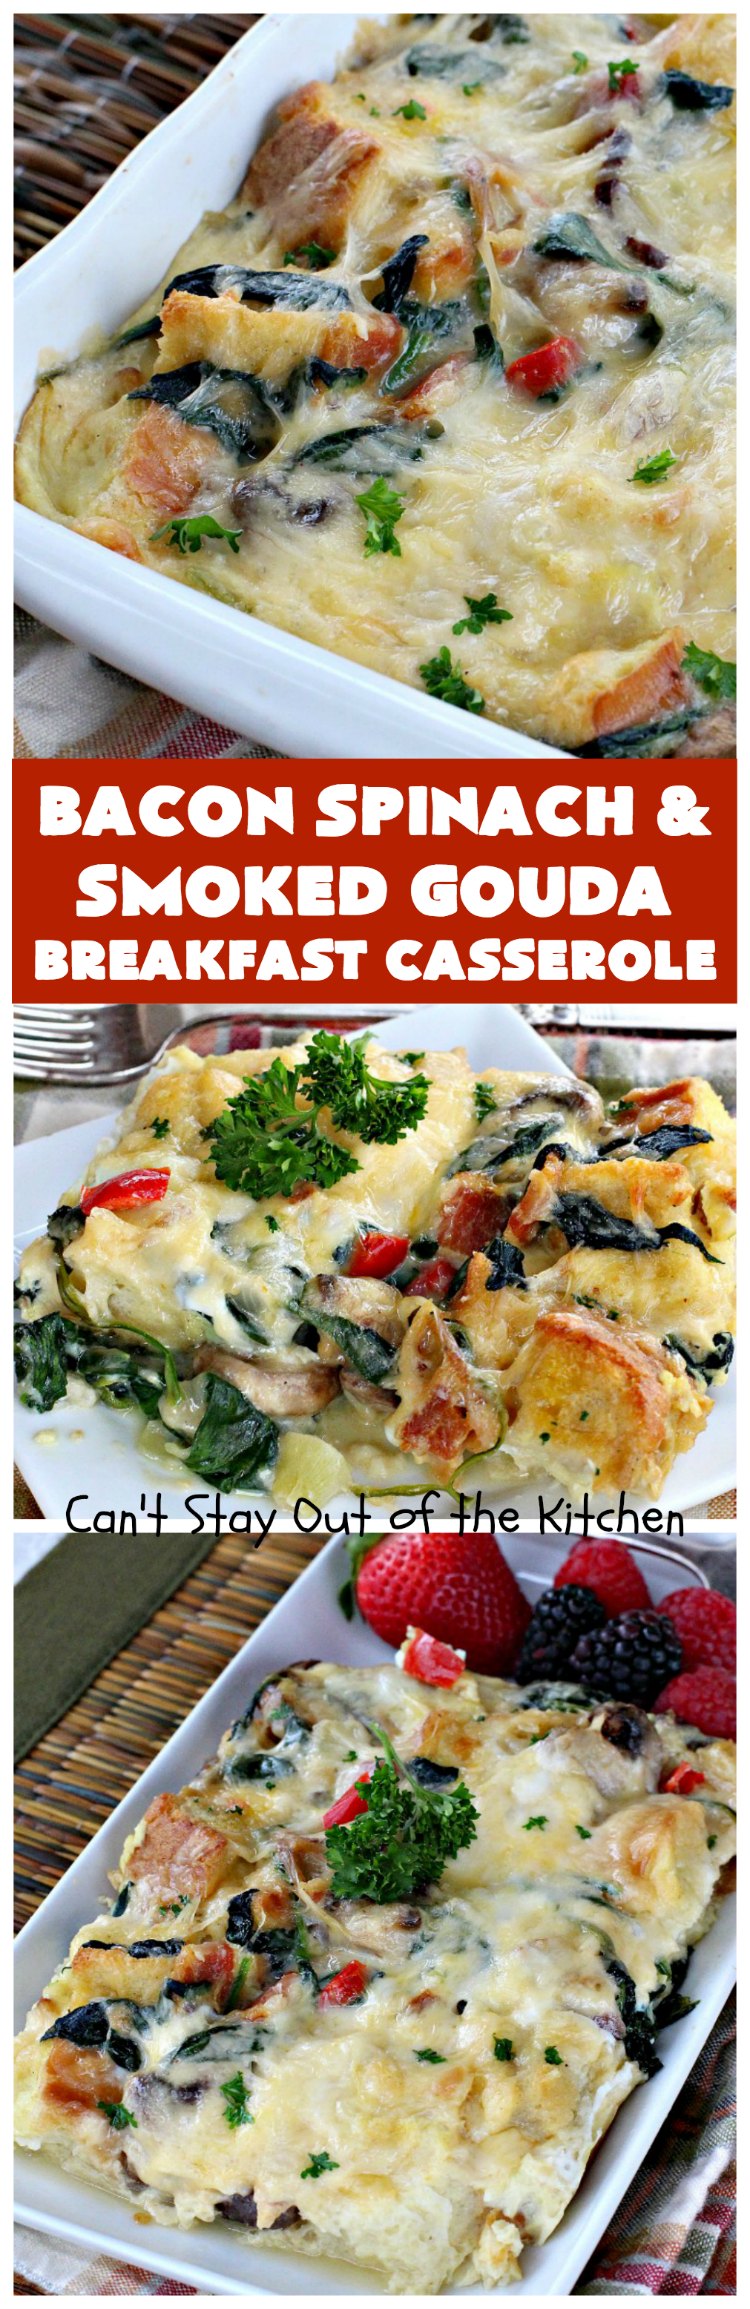 Bacon Spinach and Smoked Gouda Breakfast Casserole | Can't Stay Out of the Kitchen